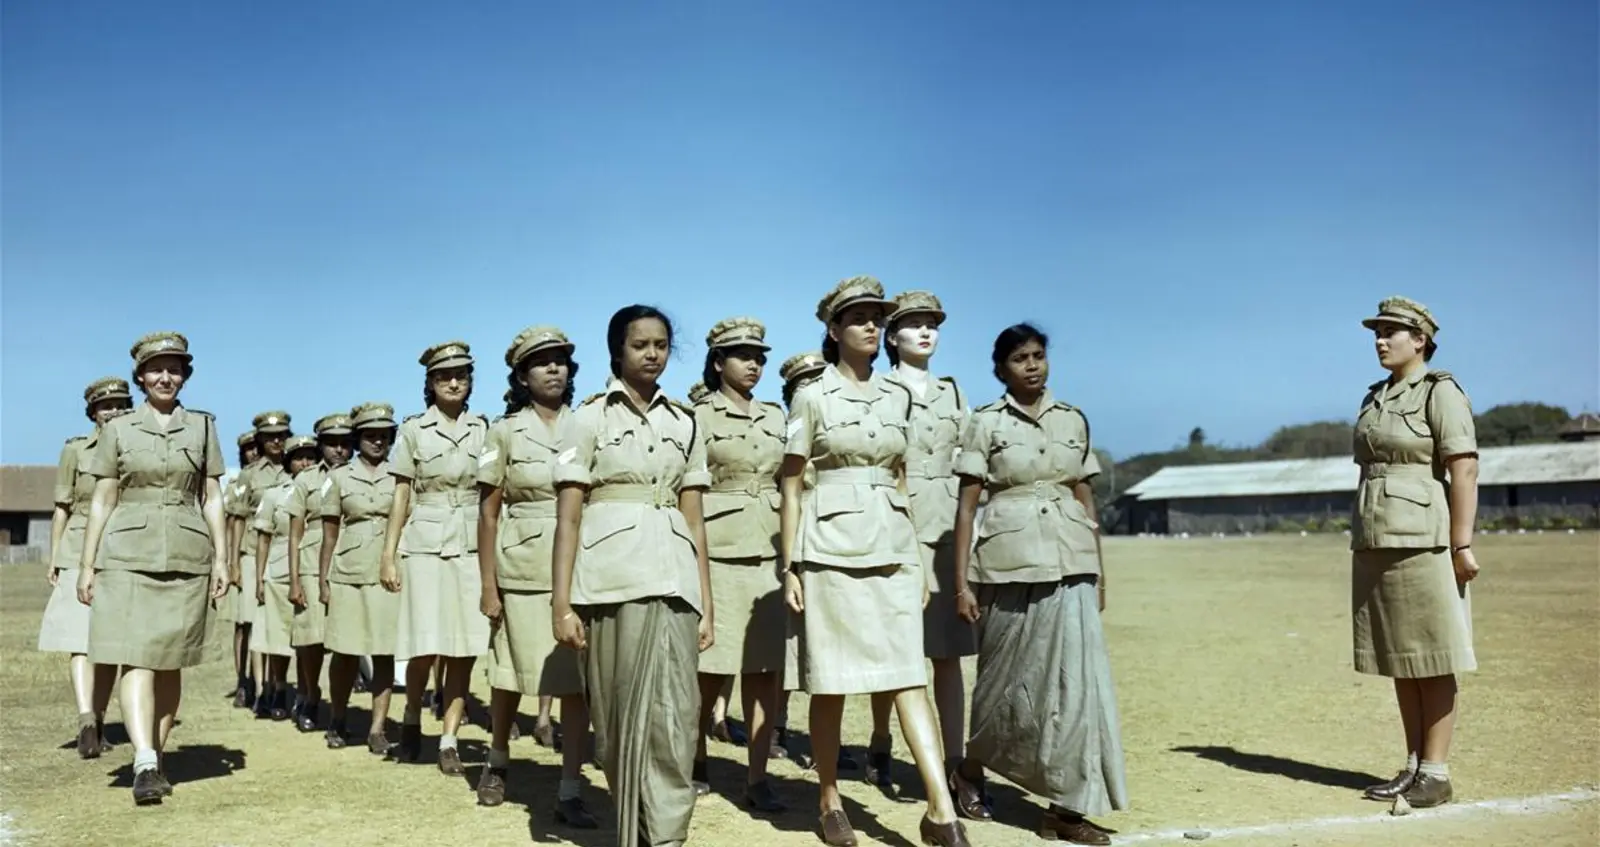 Recruits of the Indian Auxiliary Territorial Service, part of the Women's Auxiliary Corps of the British Indian Army